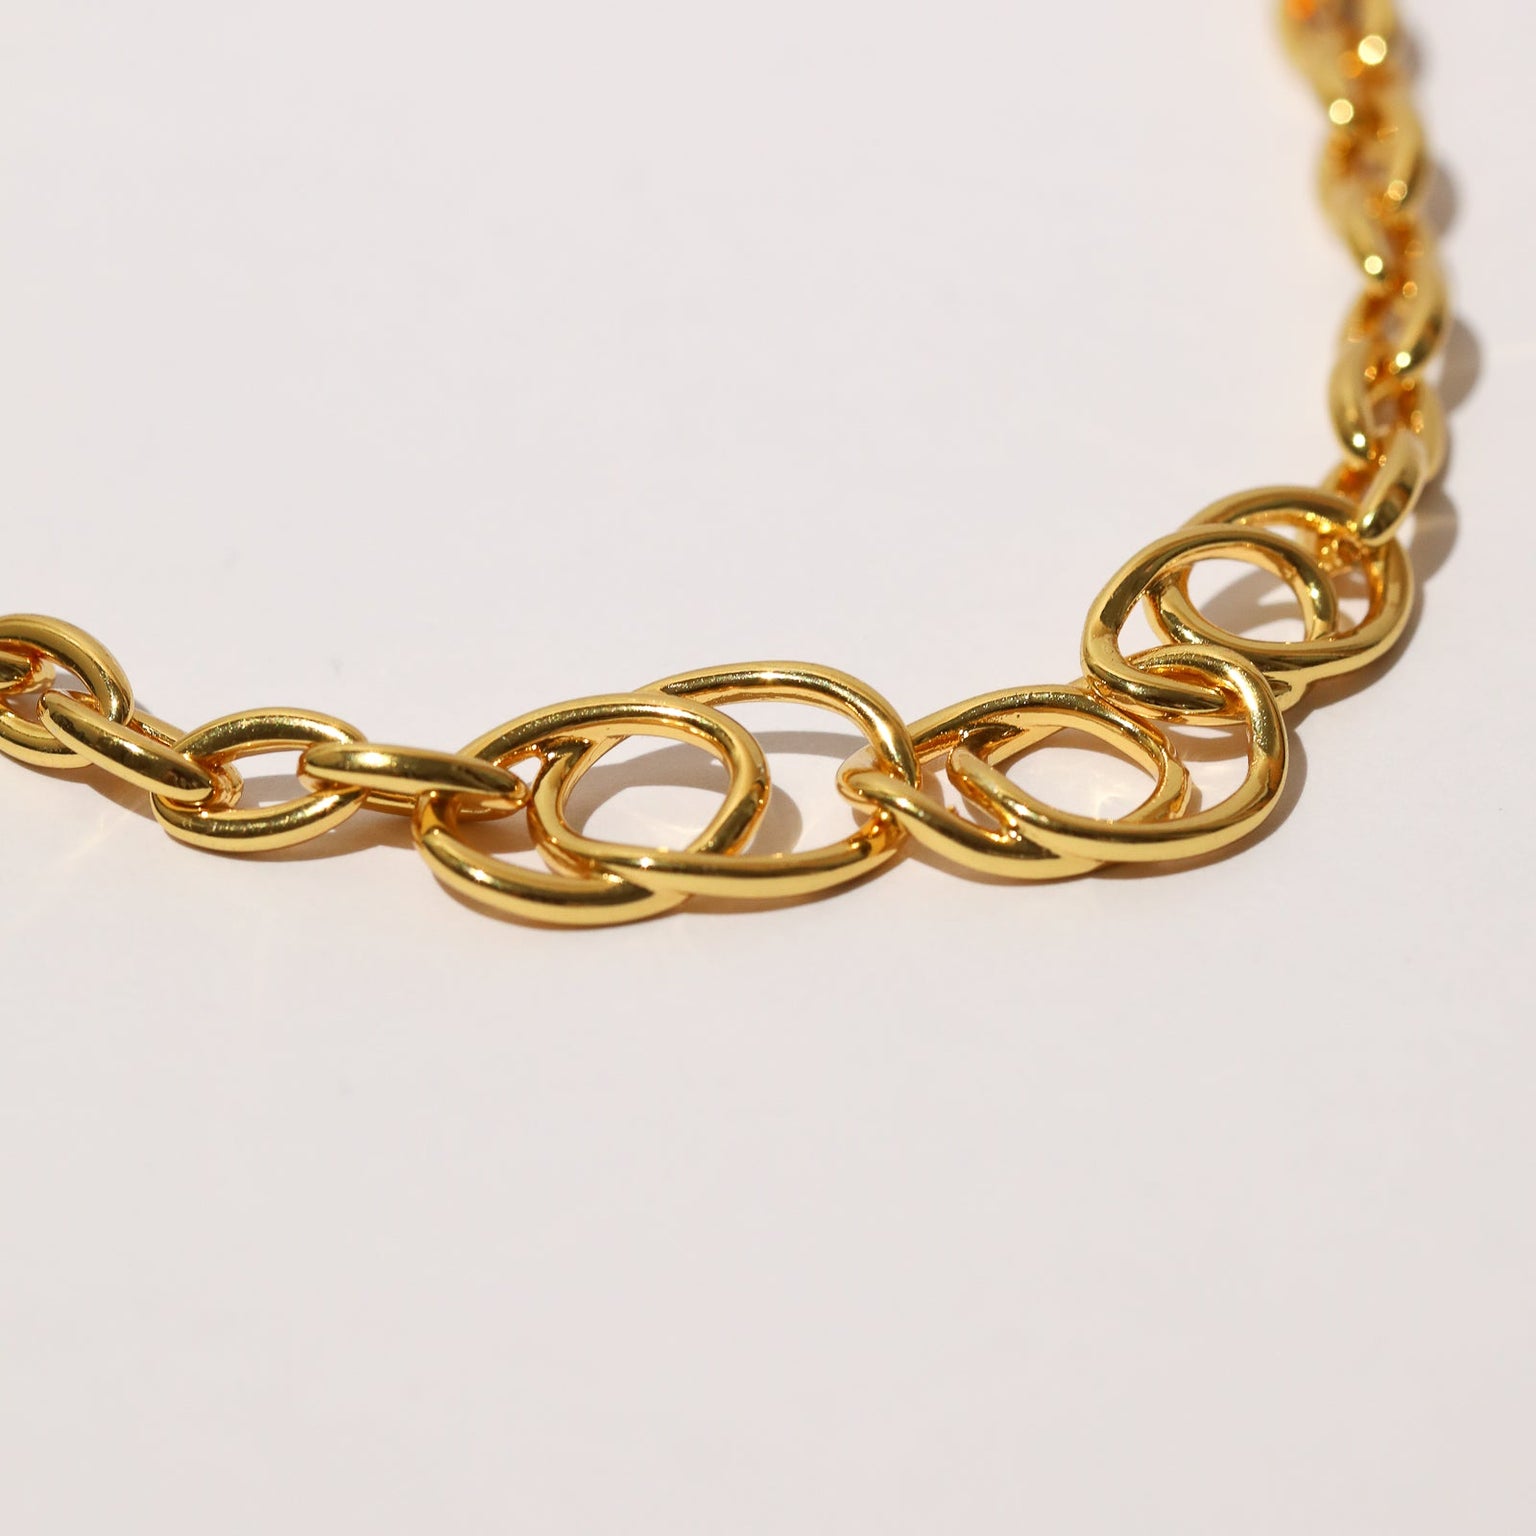 Orbit Chain Necklace in Gold close up